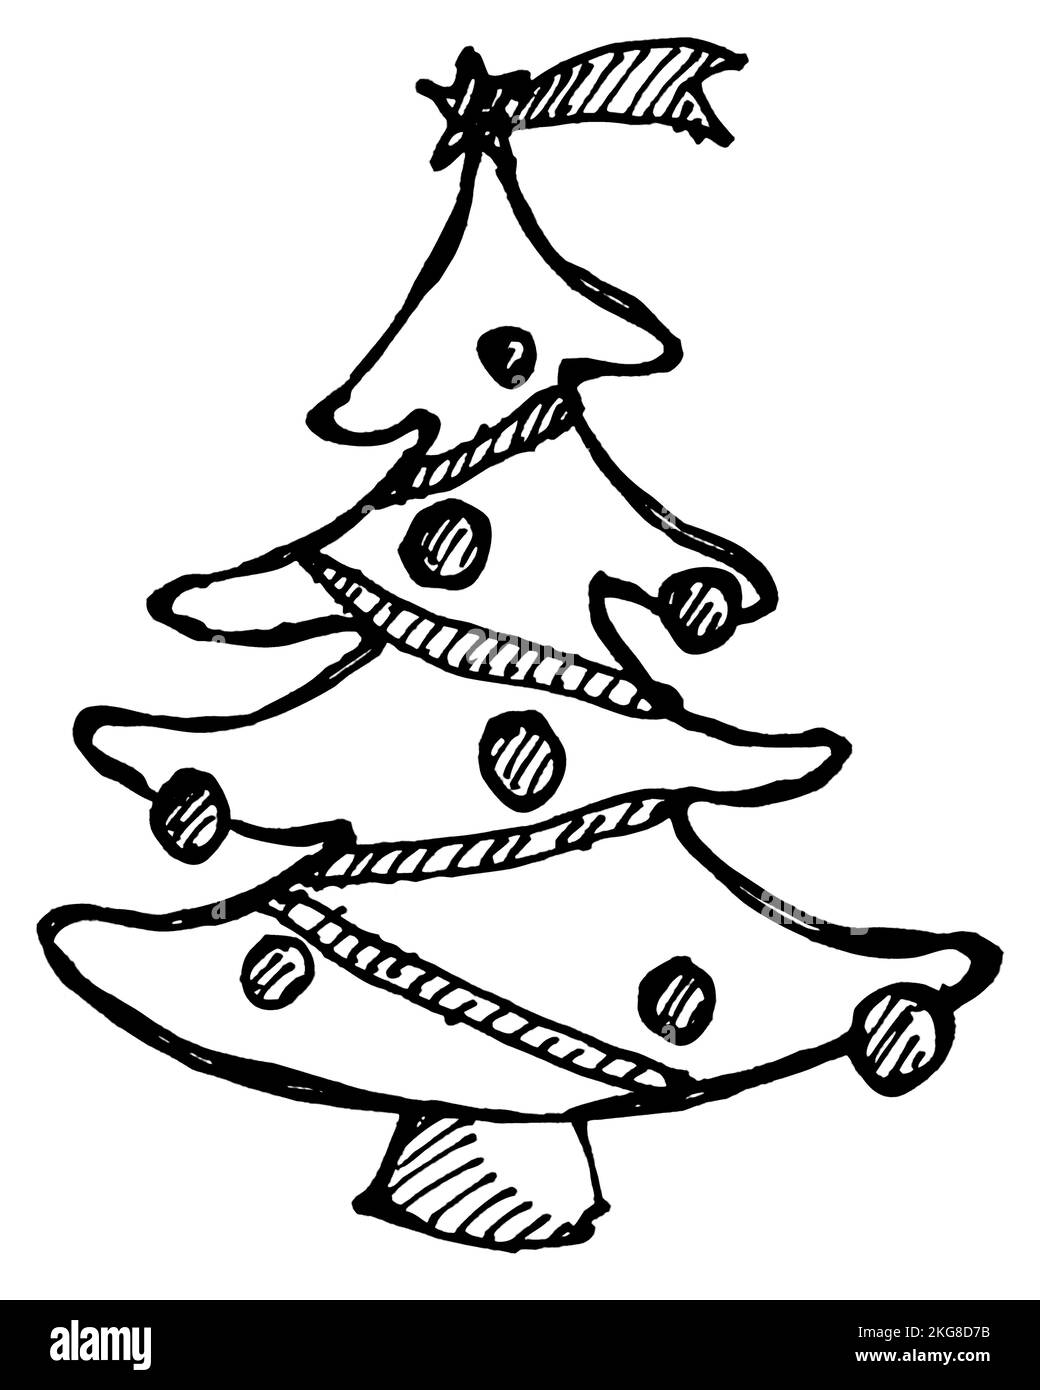 Christmas tree icon freehand drawn Stock Vector